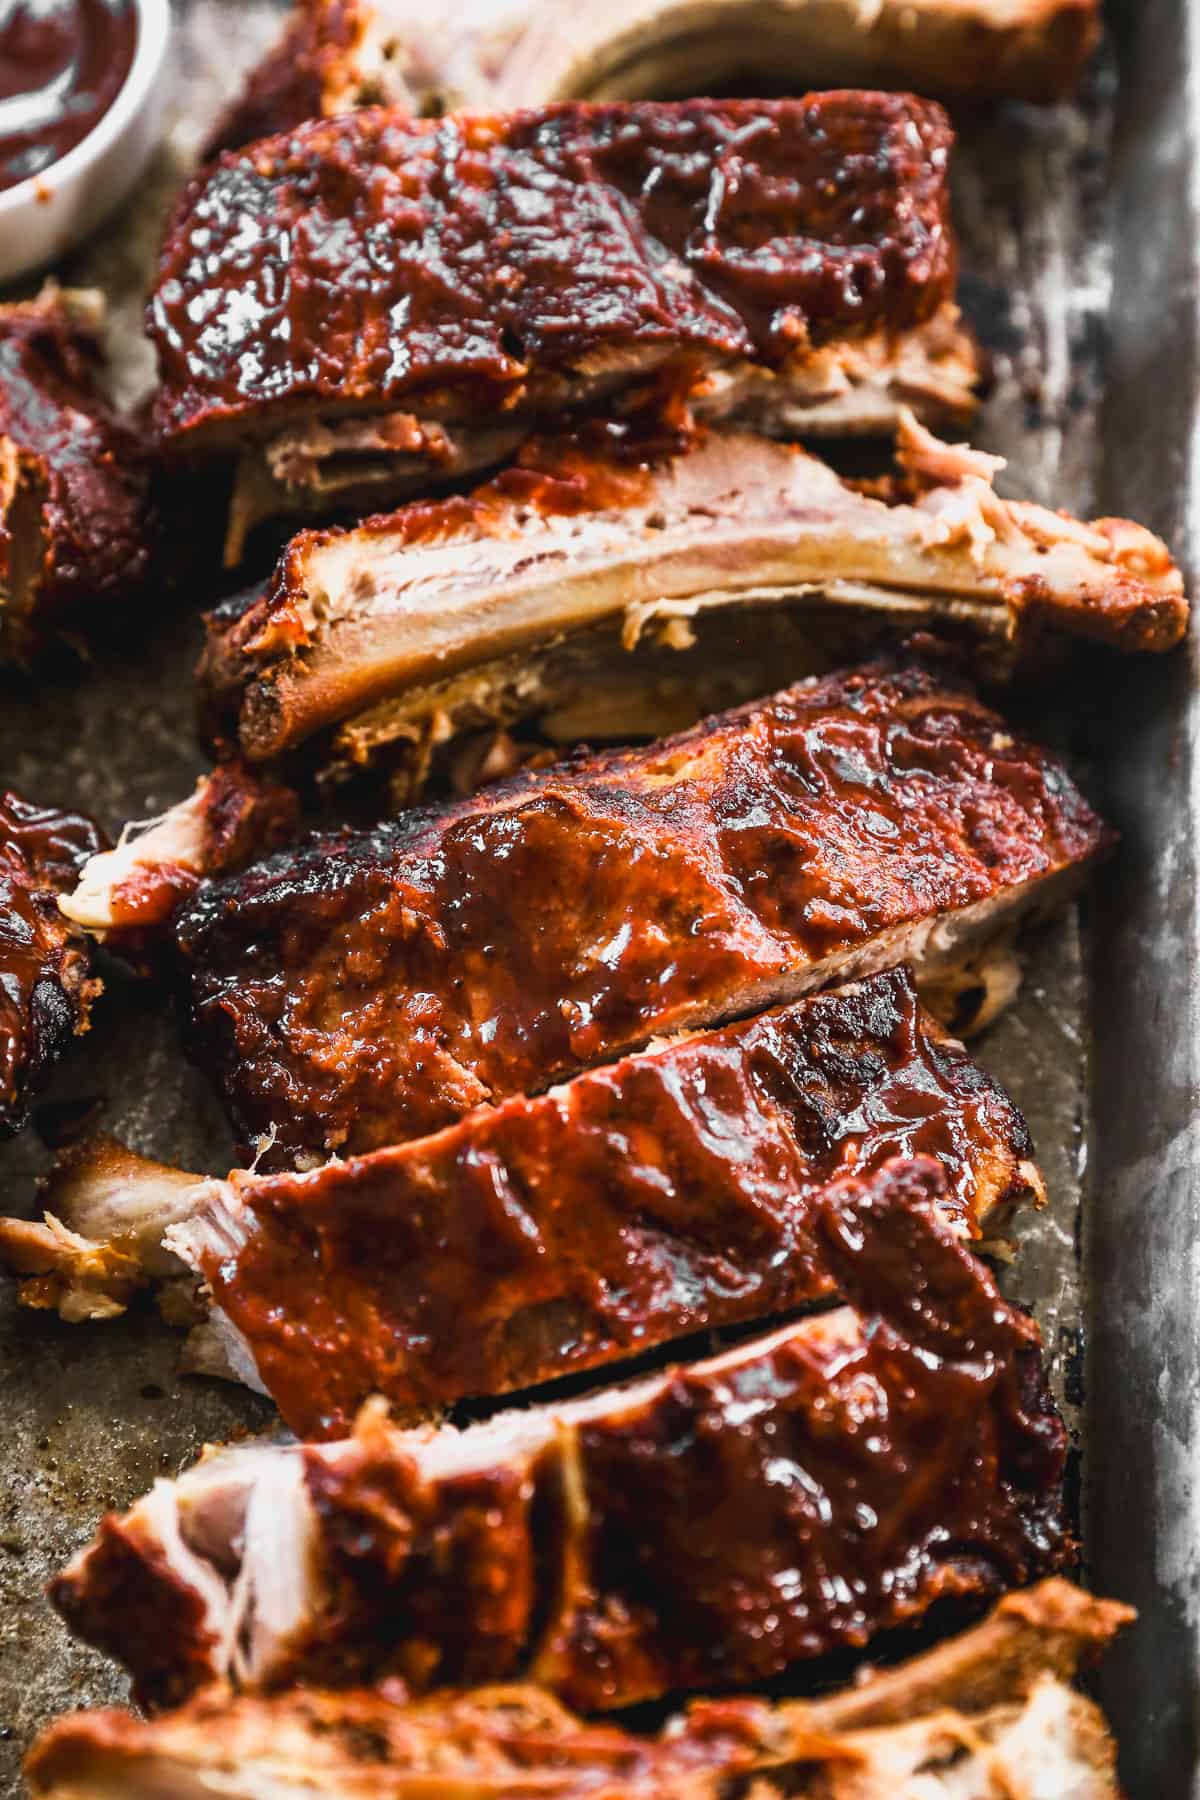 A close up image of the Best Slow Cooker Ribs on a baking sheet, smothered in homemade BBQ sauce.